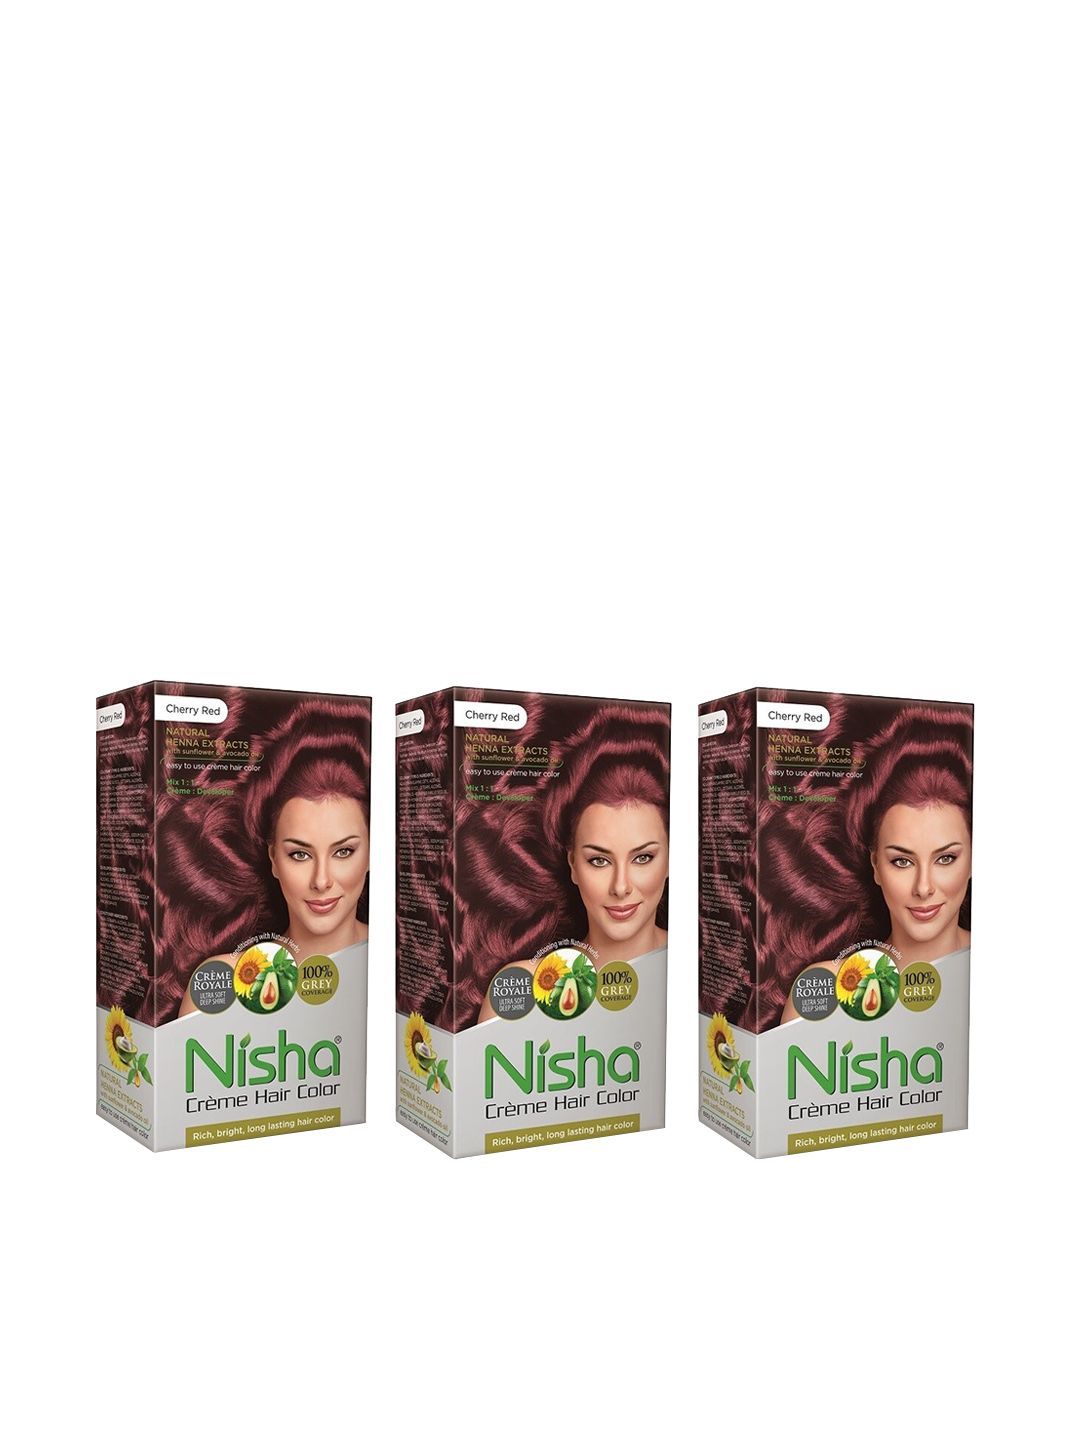 Nisha Unisex Red Pack of 3 Creme Hair Color 120gm each- Cherry Red Price in India